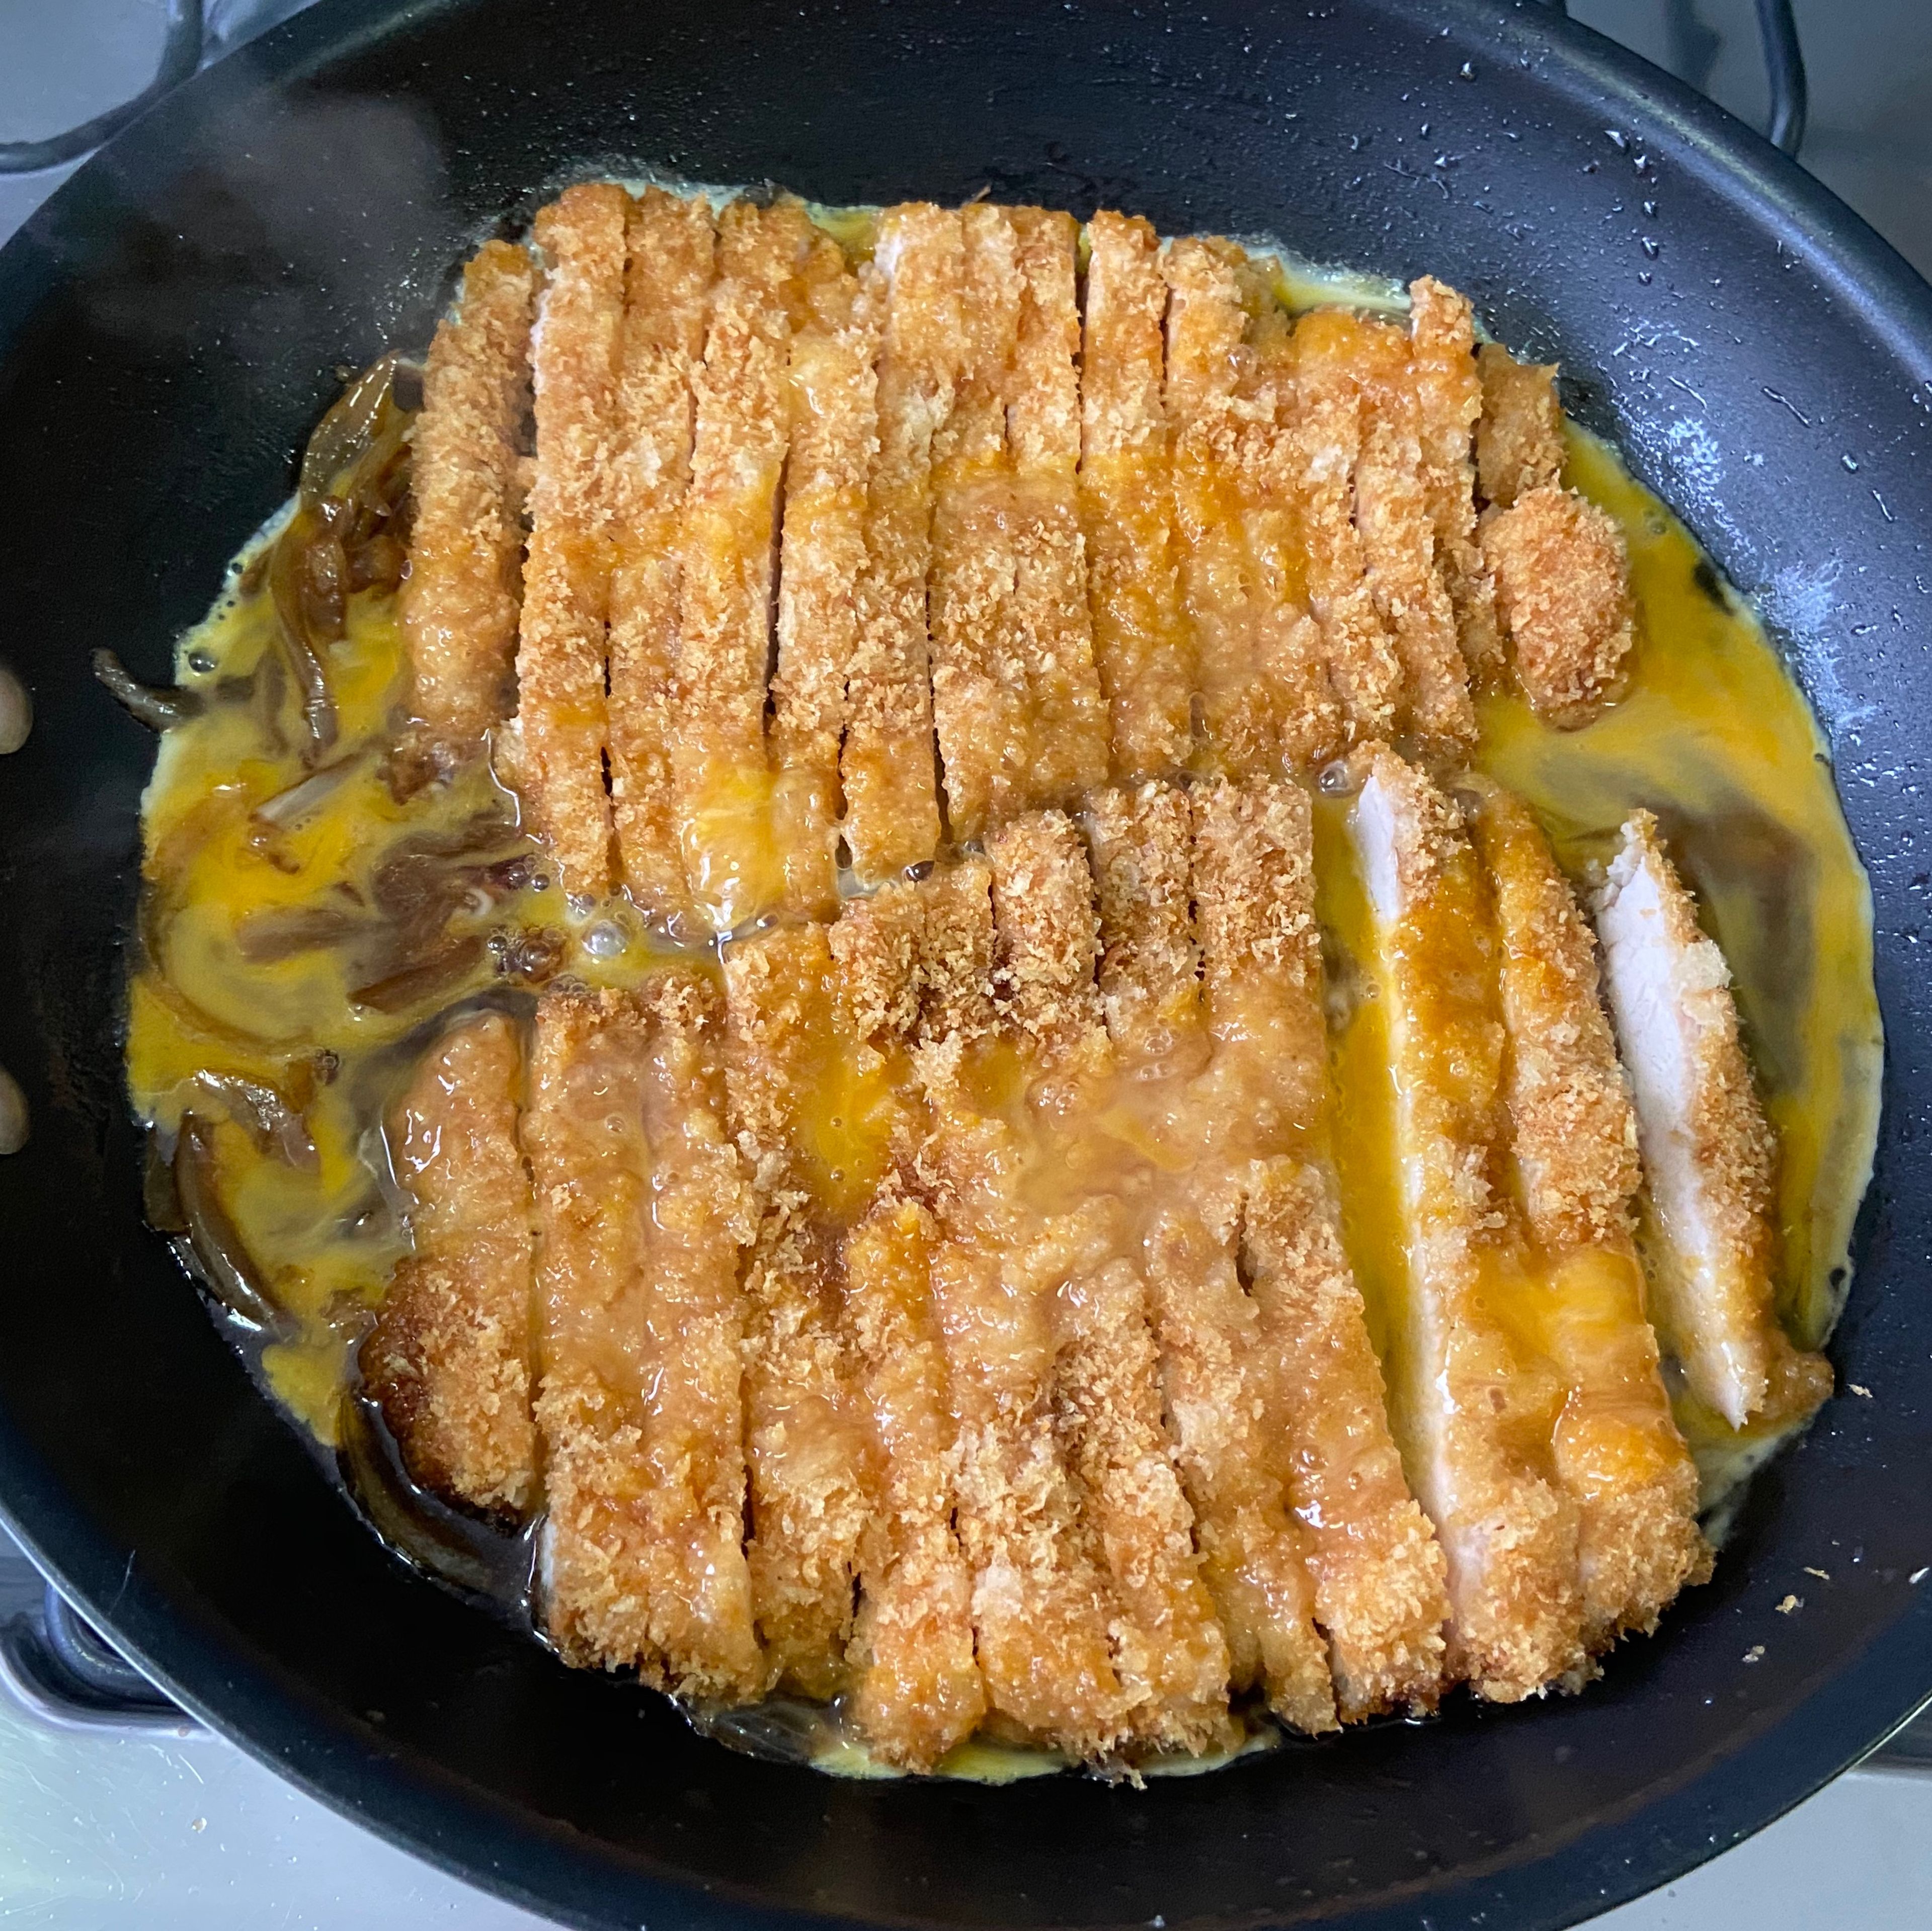 Carefully transfer each sliced cutlet to the pan and then immediately add the egg. Cover with a large lid and cook on medium heat until the egg is set, about 3-5 mins. 